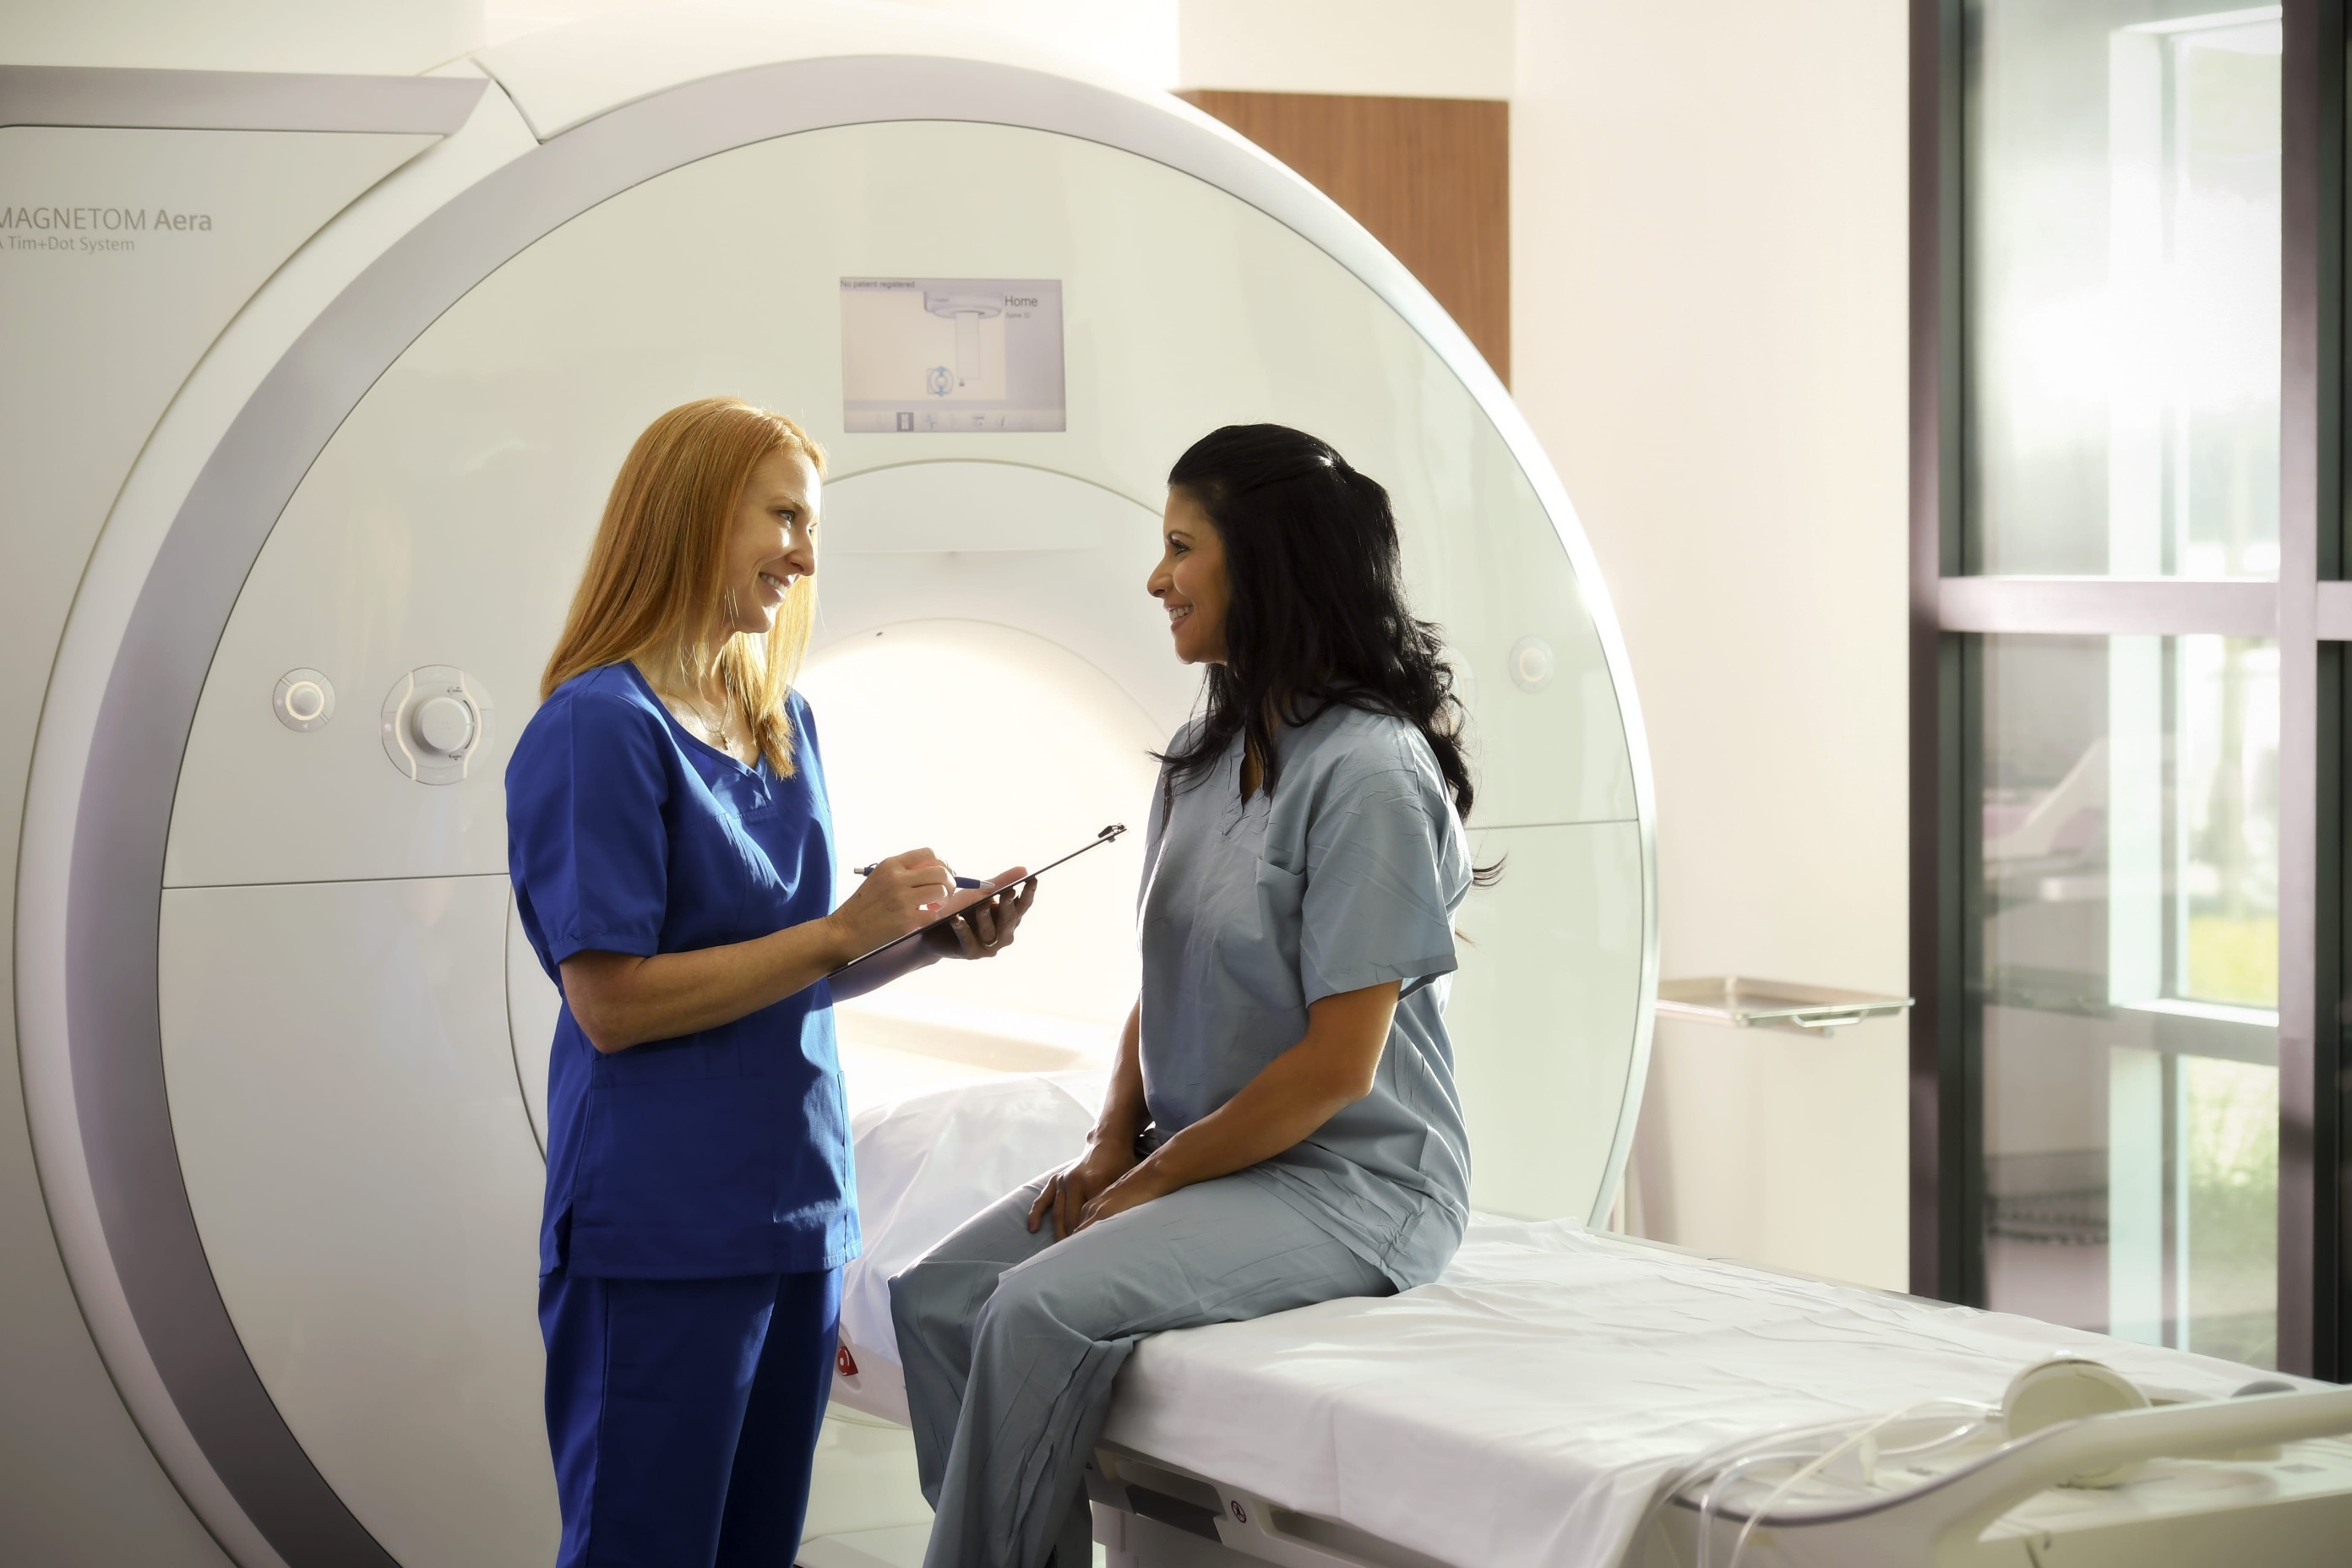 A brain cancer patient and cancer care specialist talk in front of an CT scan machine